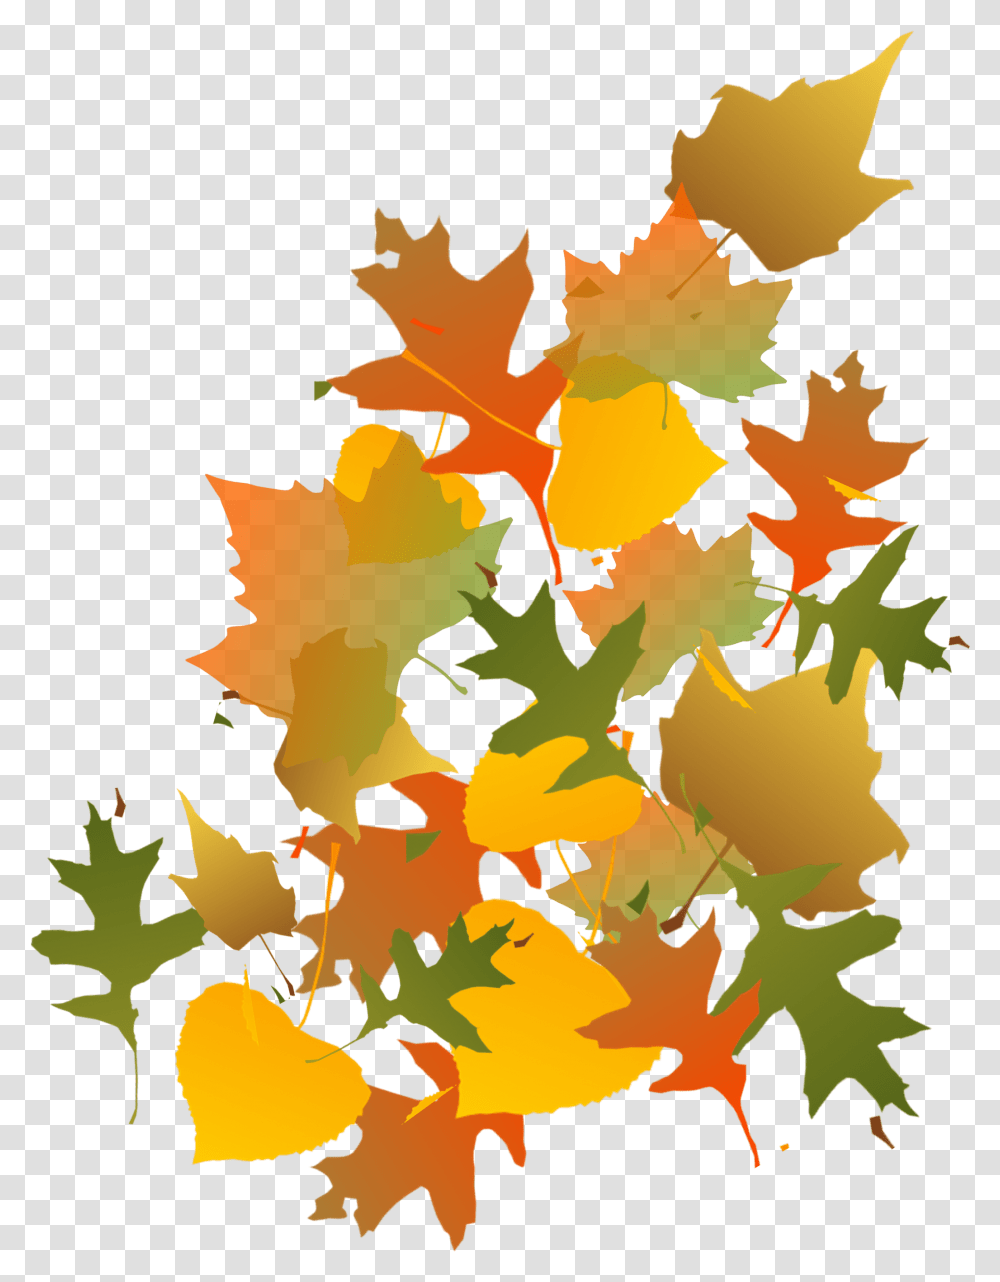 Fall Leaves Image Autumn Leaves Clip Art, Leaf, Plant, Tree, Maple Transparent Png